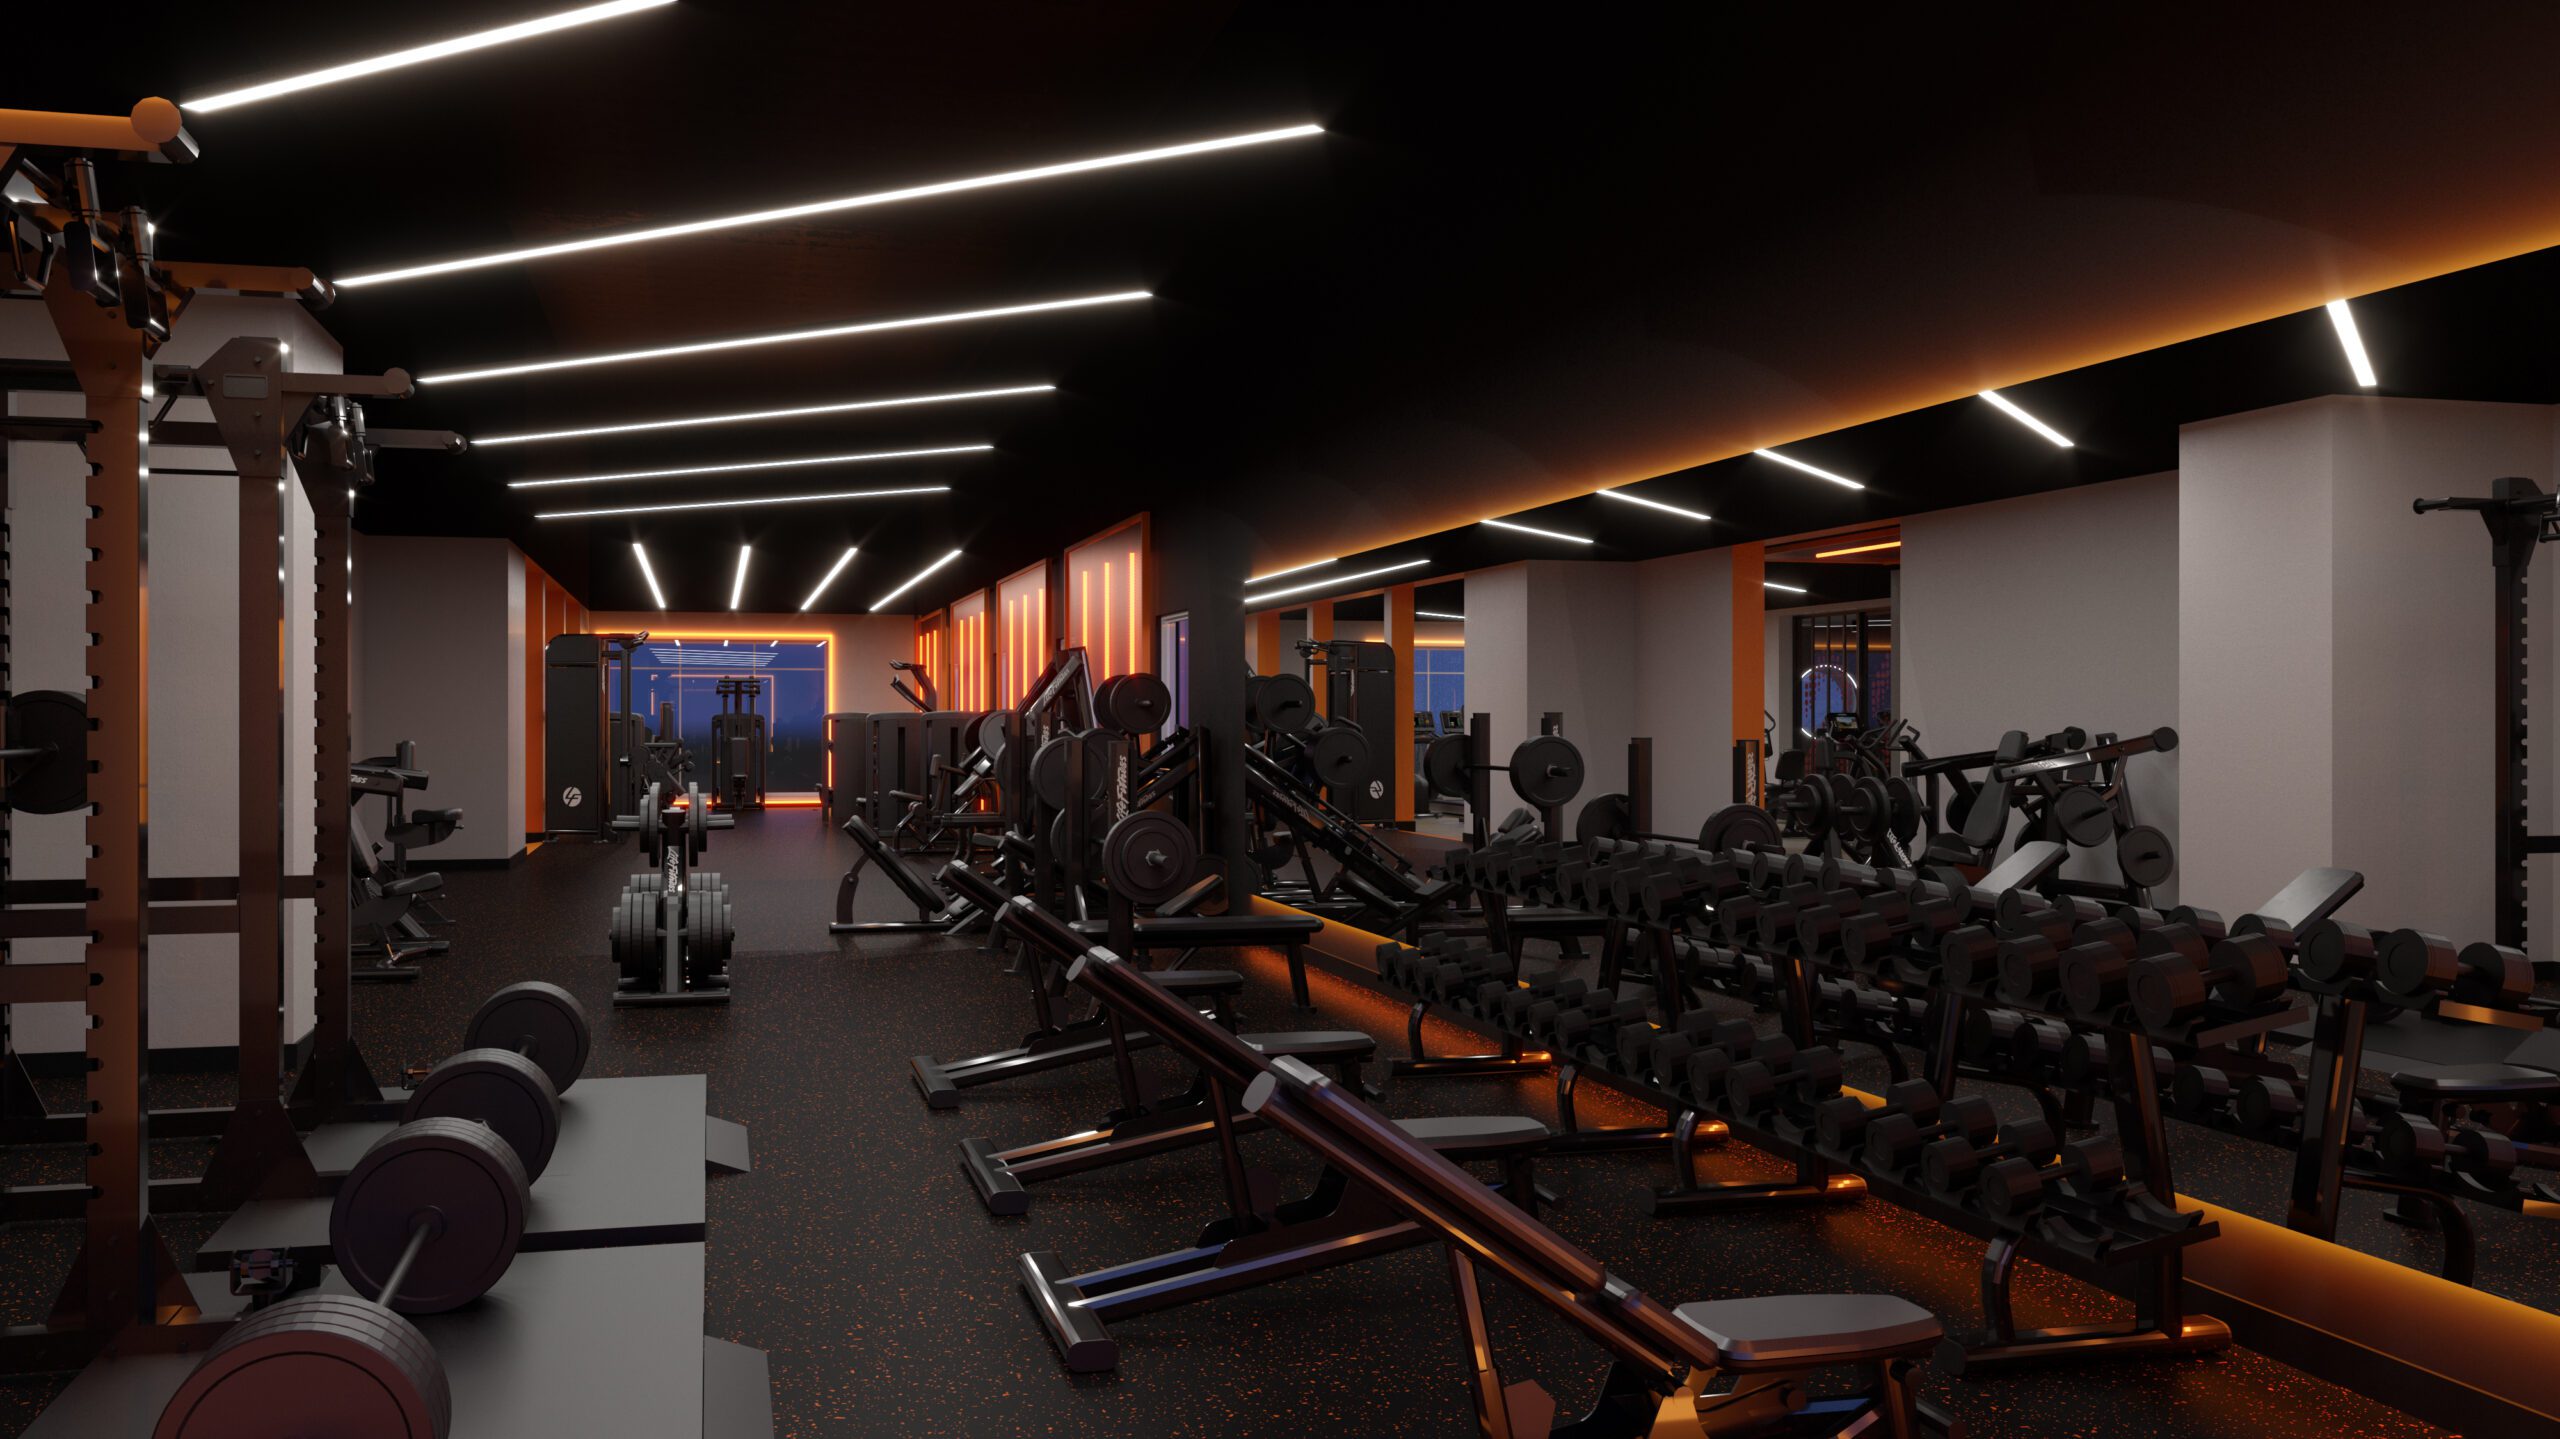 gym design and architecture with equipment segmentation and lighting